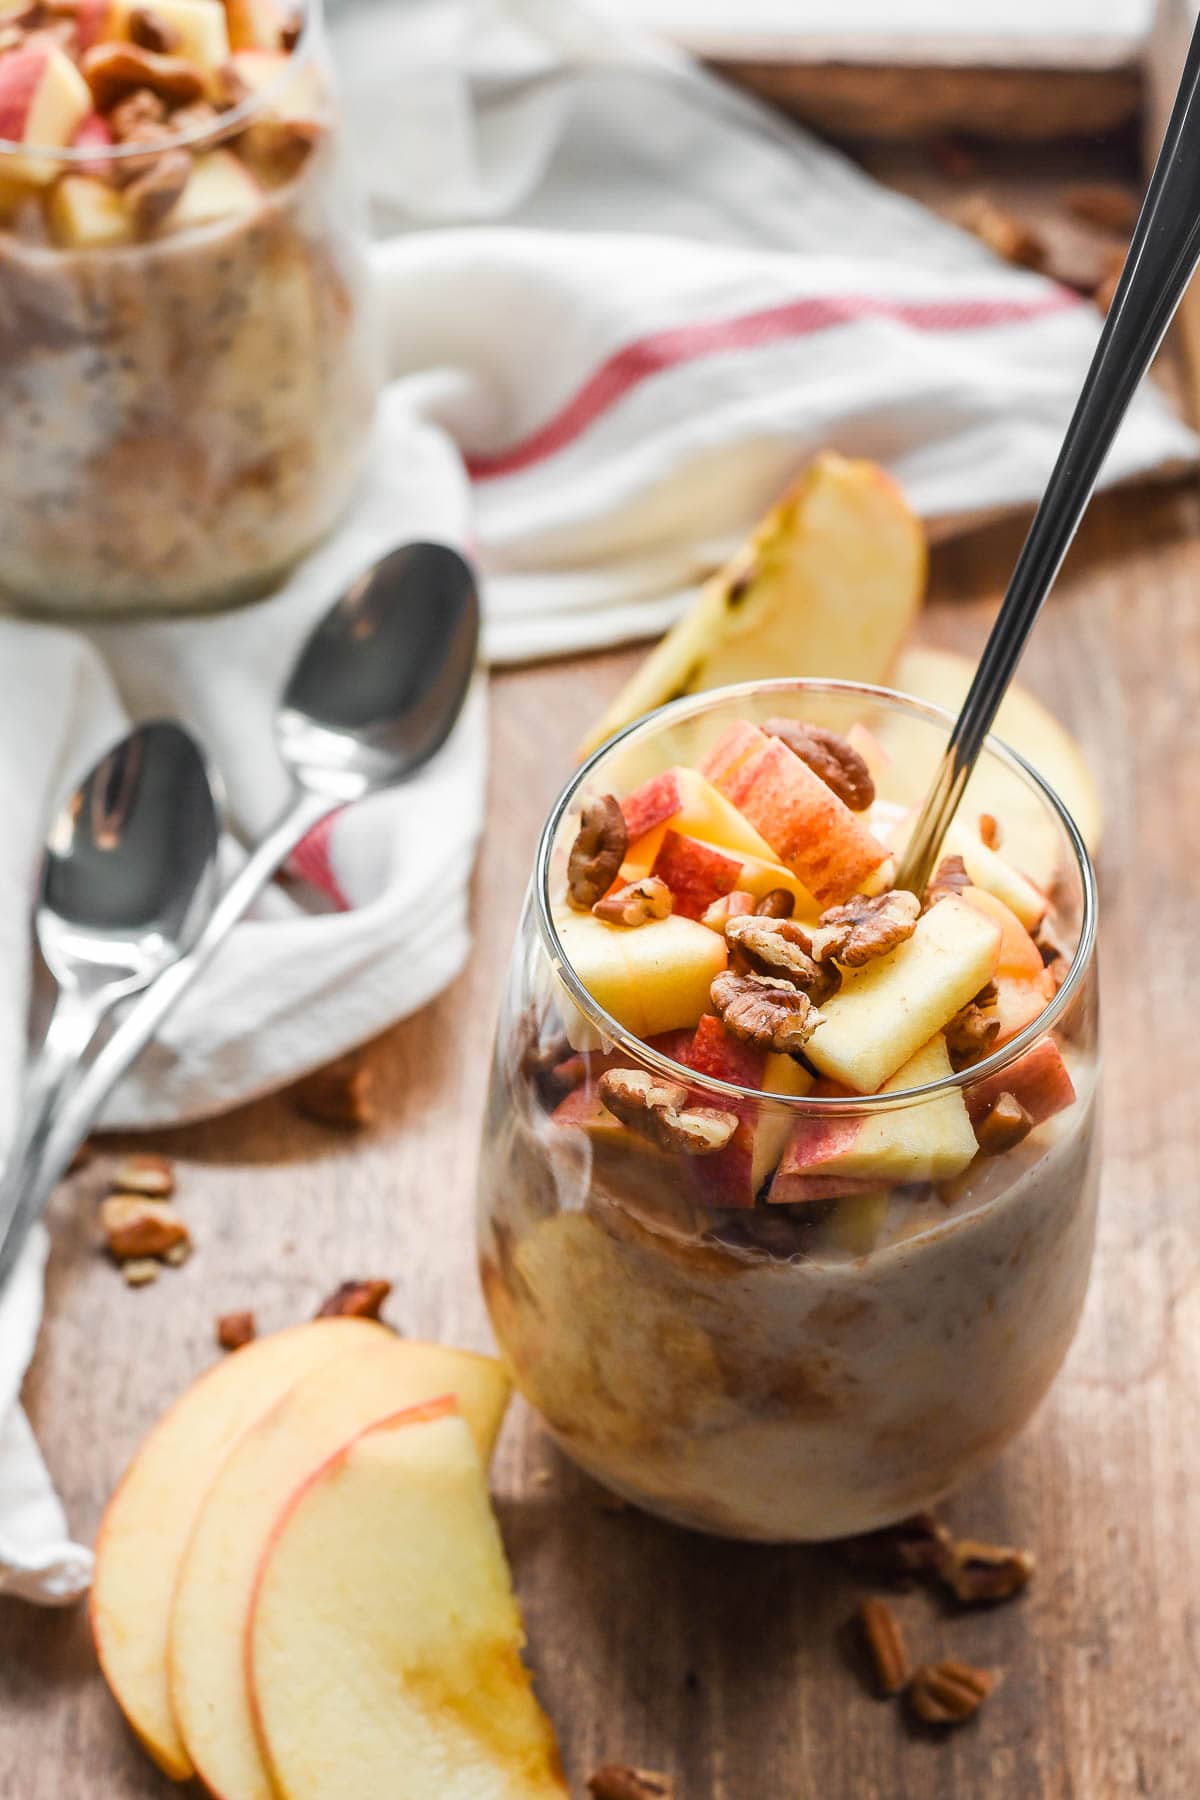 For a healthy breakfast on the go, try these EASY APPLE BUTTER OVERNIGHT OATS. They taste like fall!